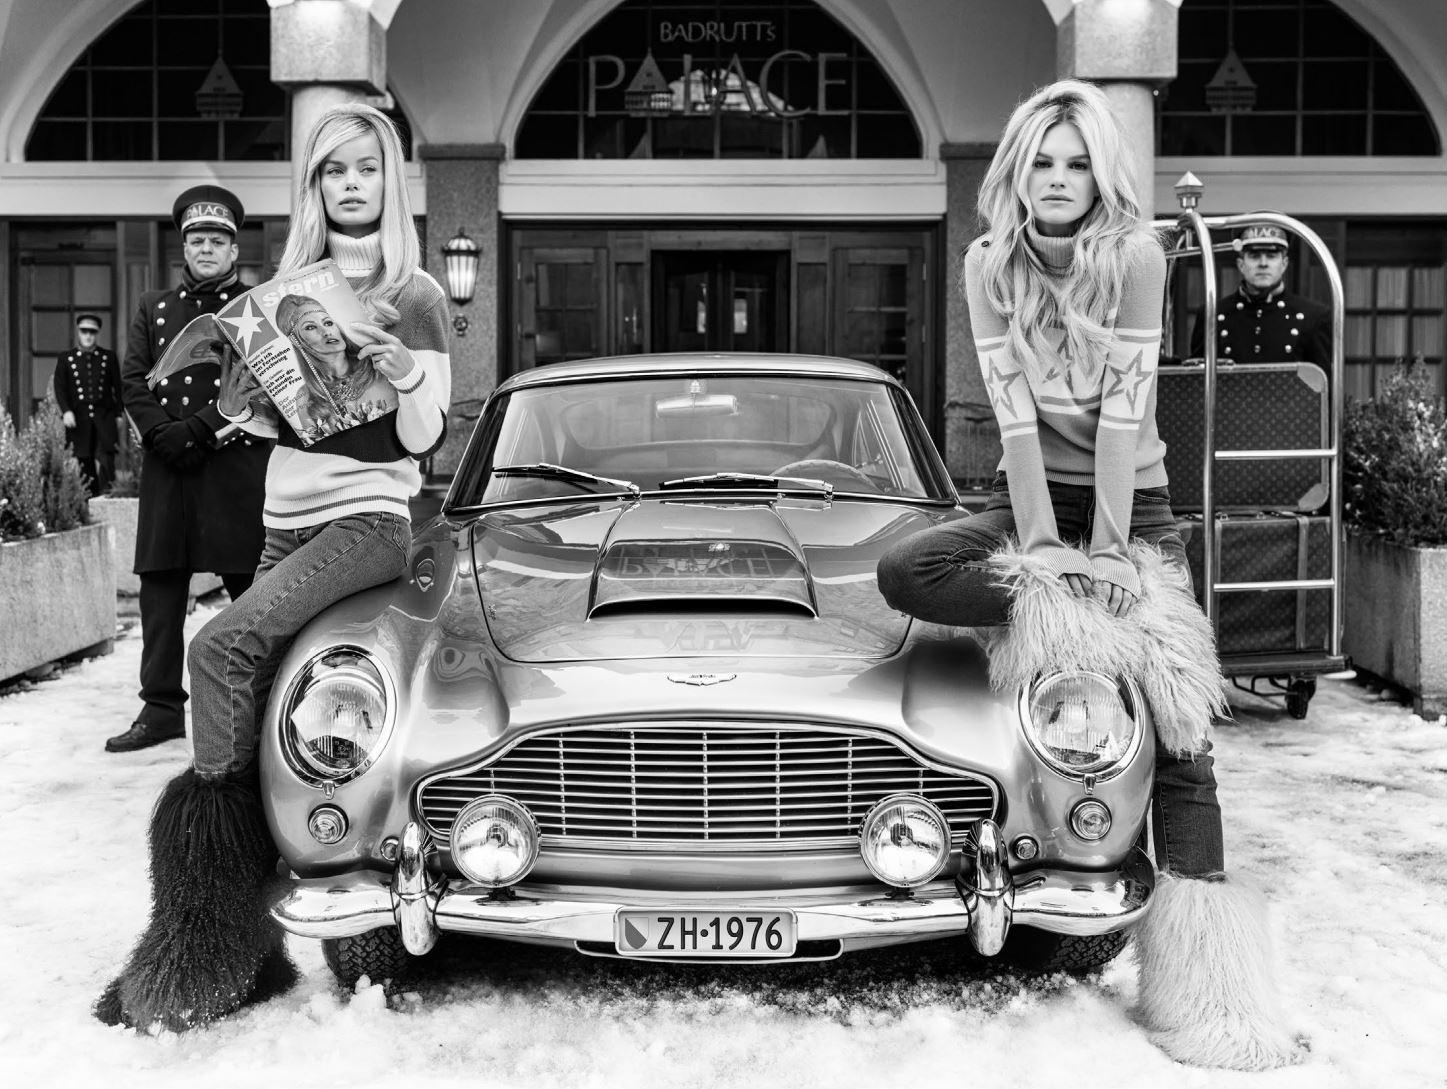 David Yarrow Black and White Photograph - Badrutt's - b&w photograph of two models posing next to a car in St. Moritz 